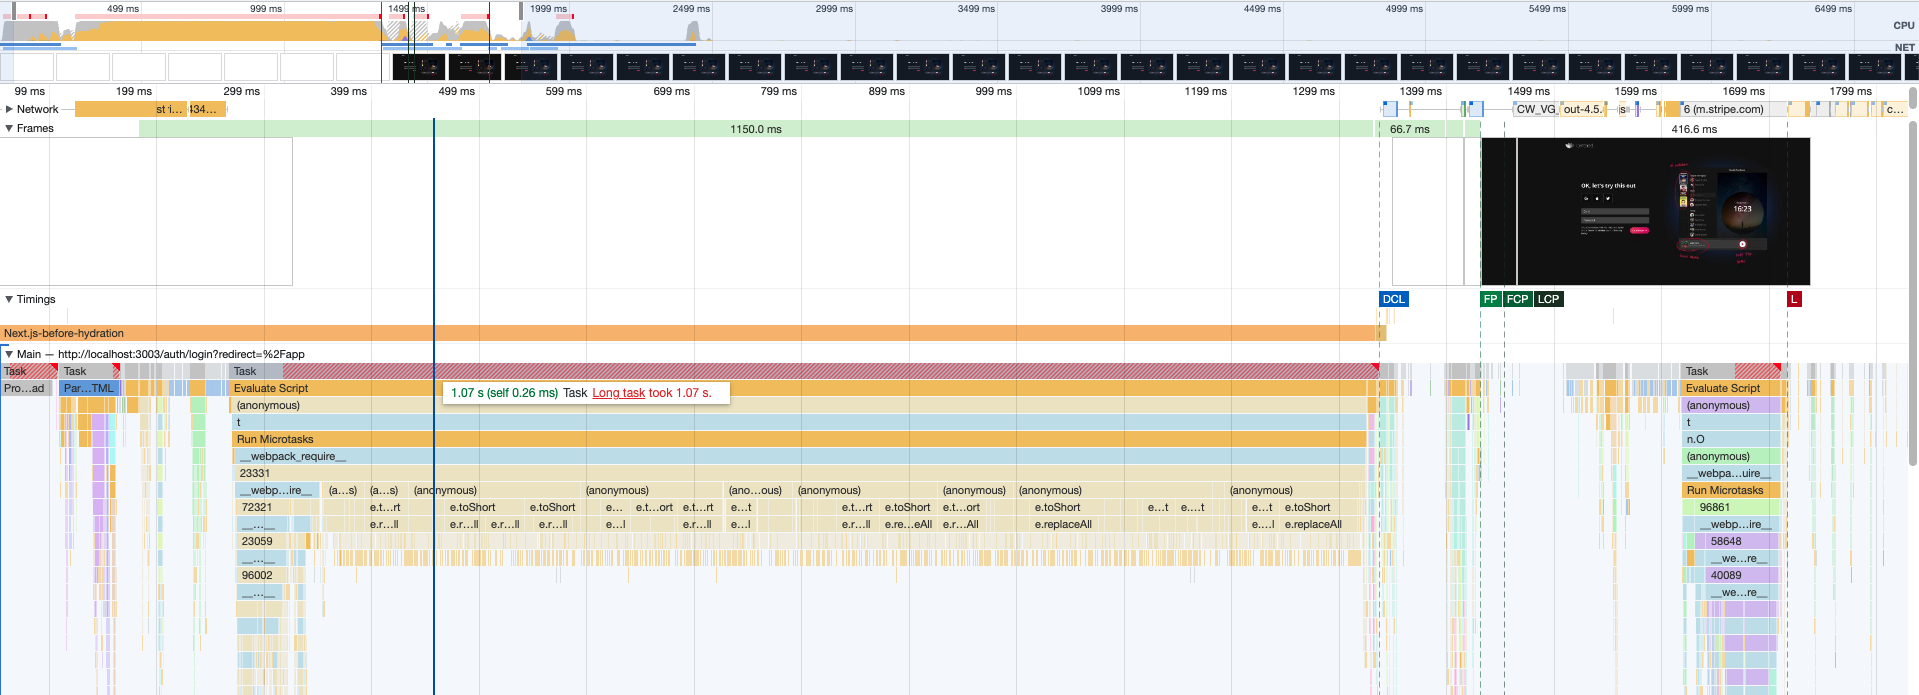 Performance flame chart loading the centered homepage. A 1.07 s long task is shown containing many anonymous functions with calls to e.toShort calling e.replaceAll.